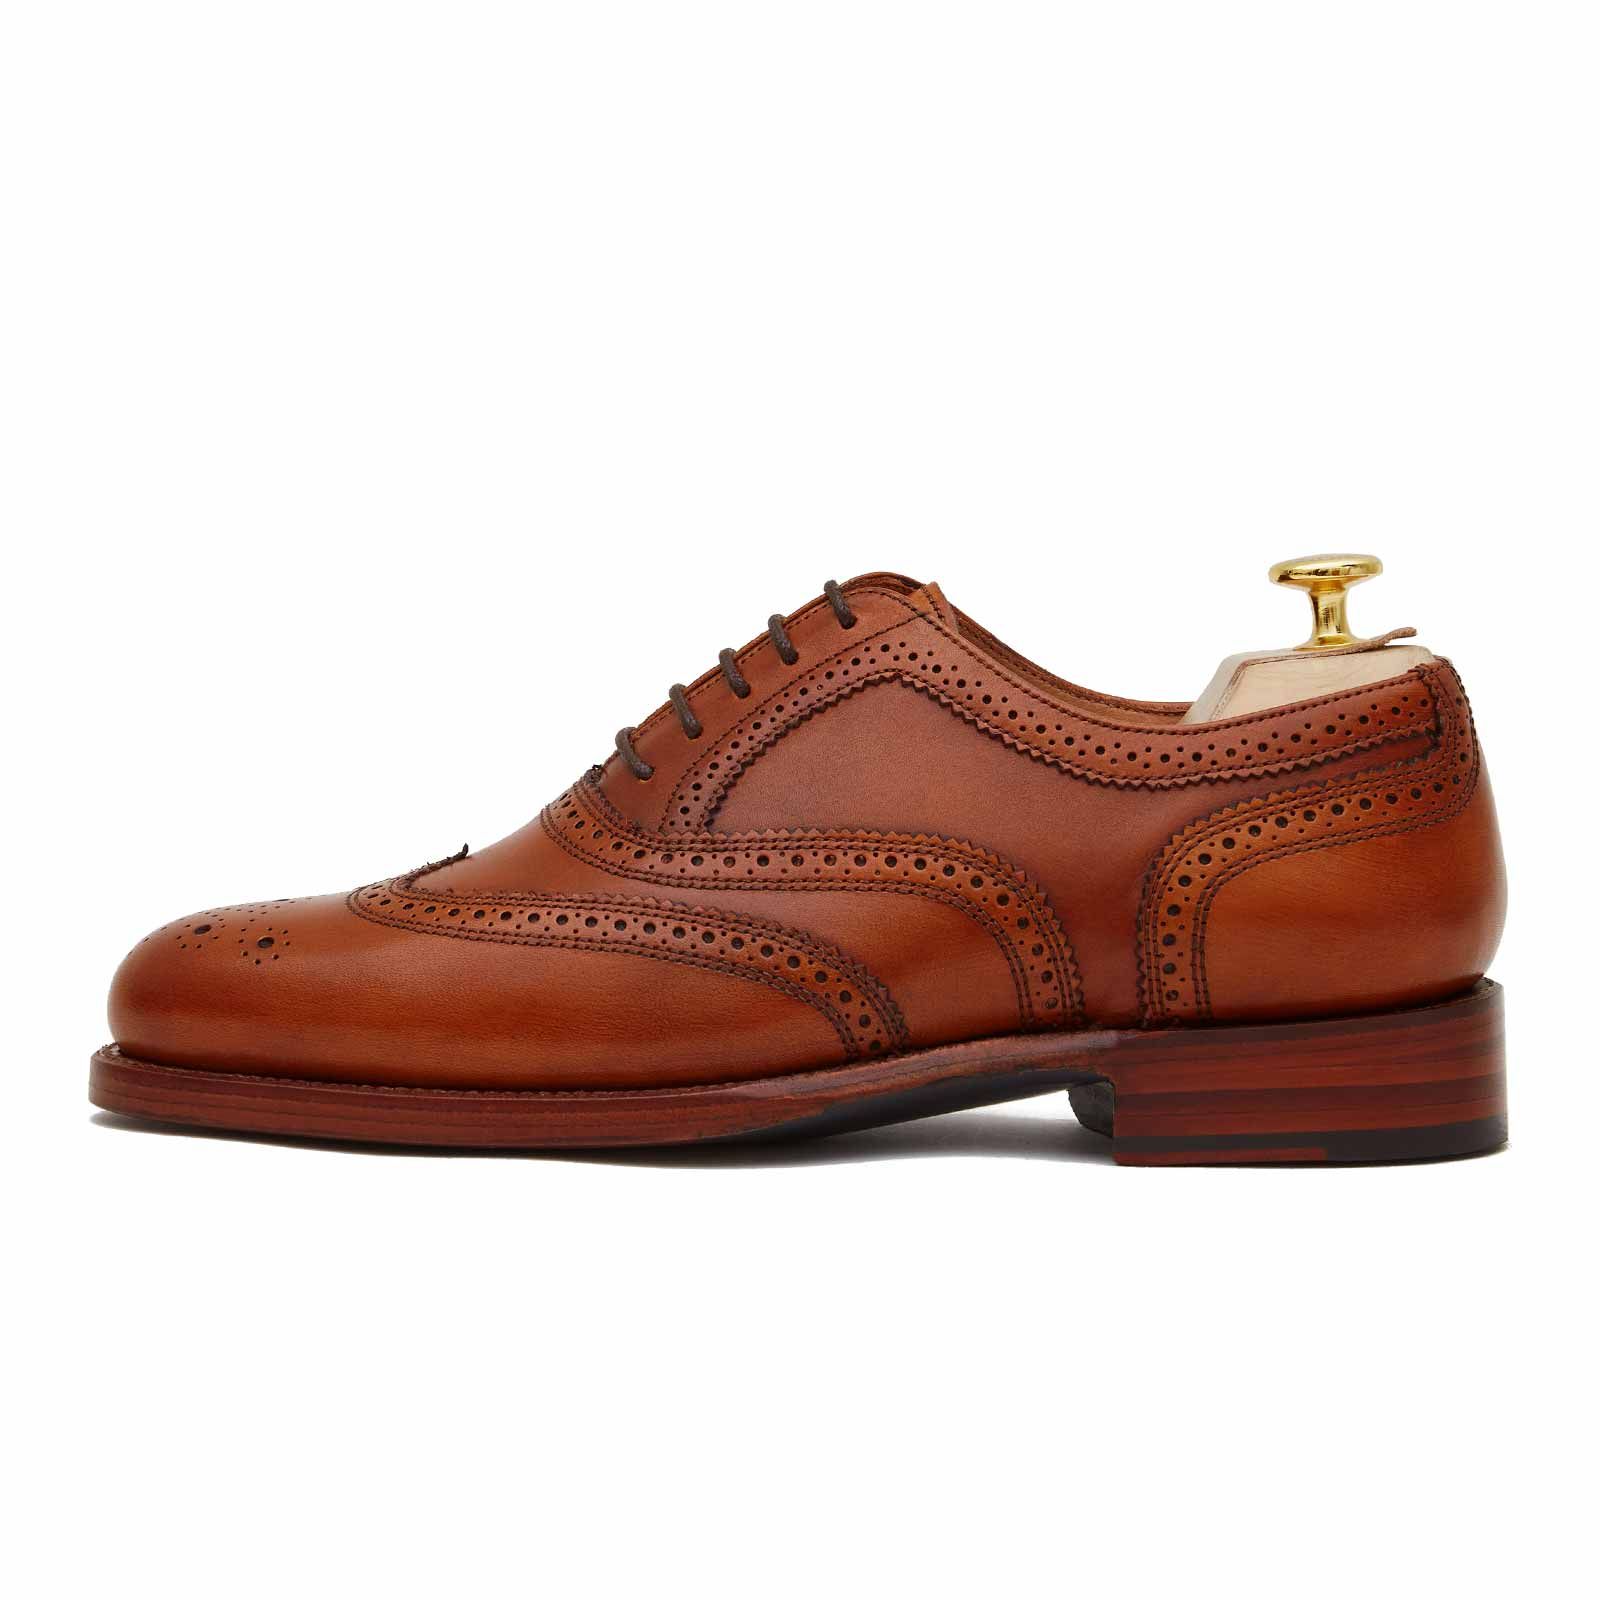 Unique English-Lasted Cedar Wood Shoe Trees for Men Specifically designed for British-made Classic Formal Shoes 